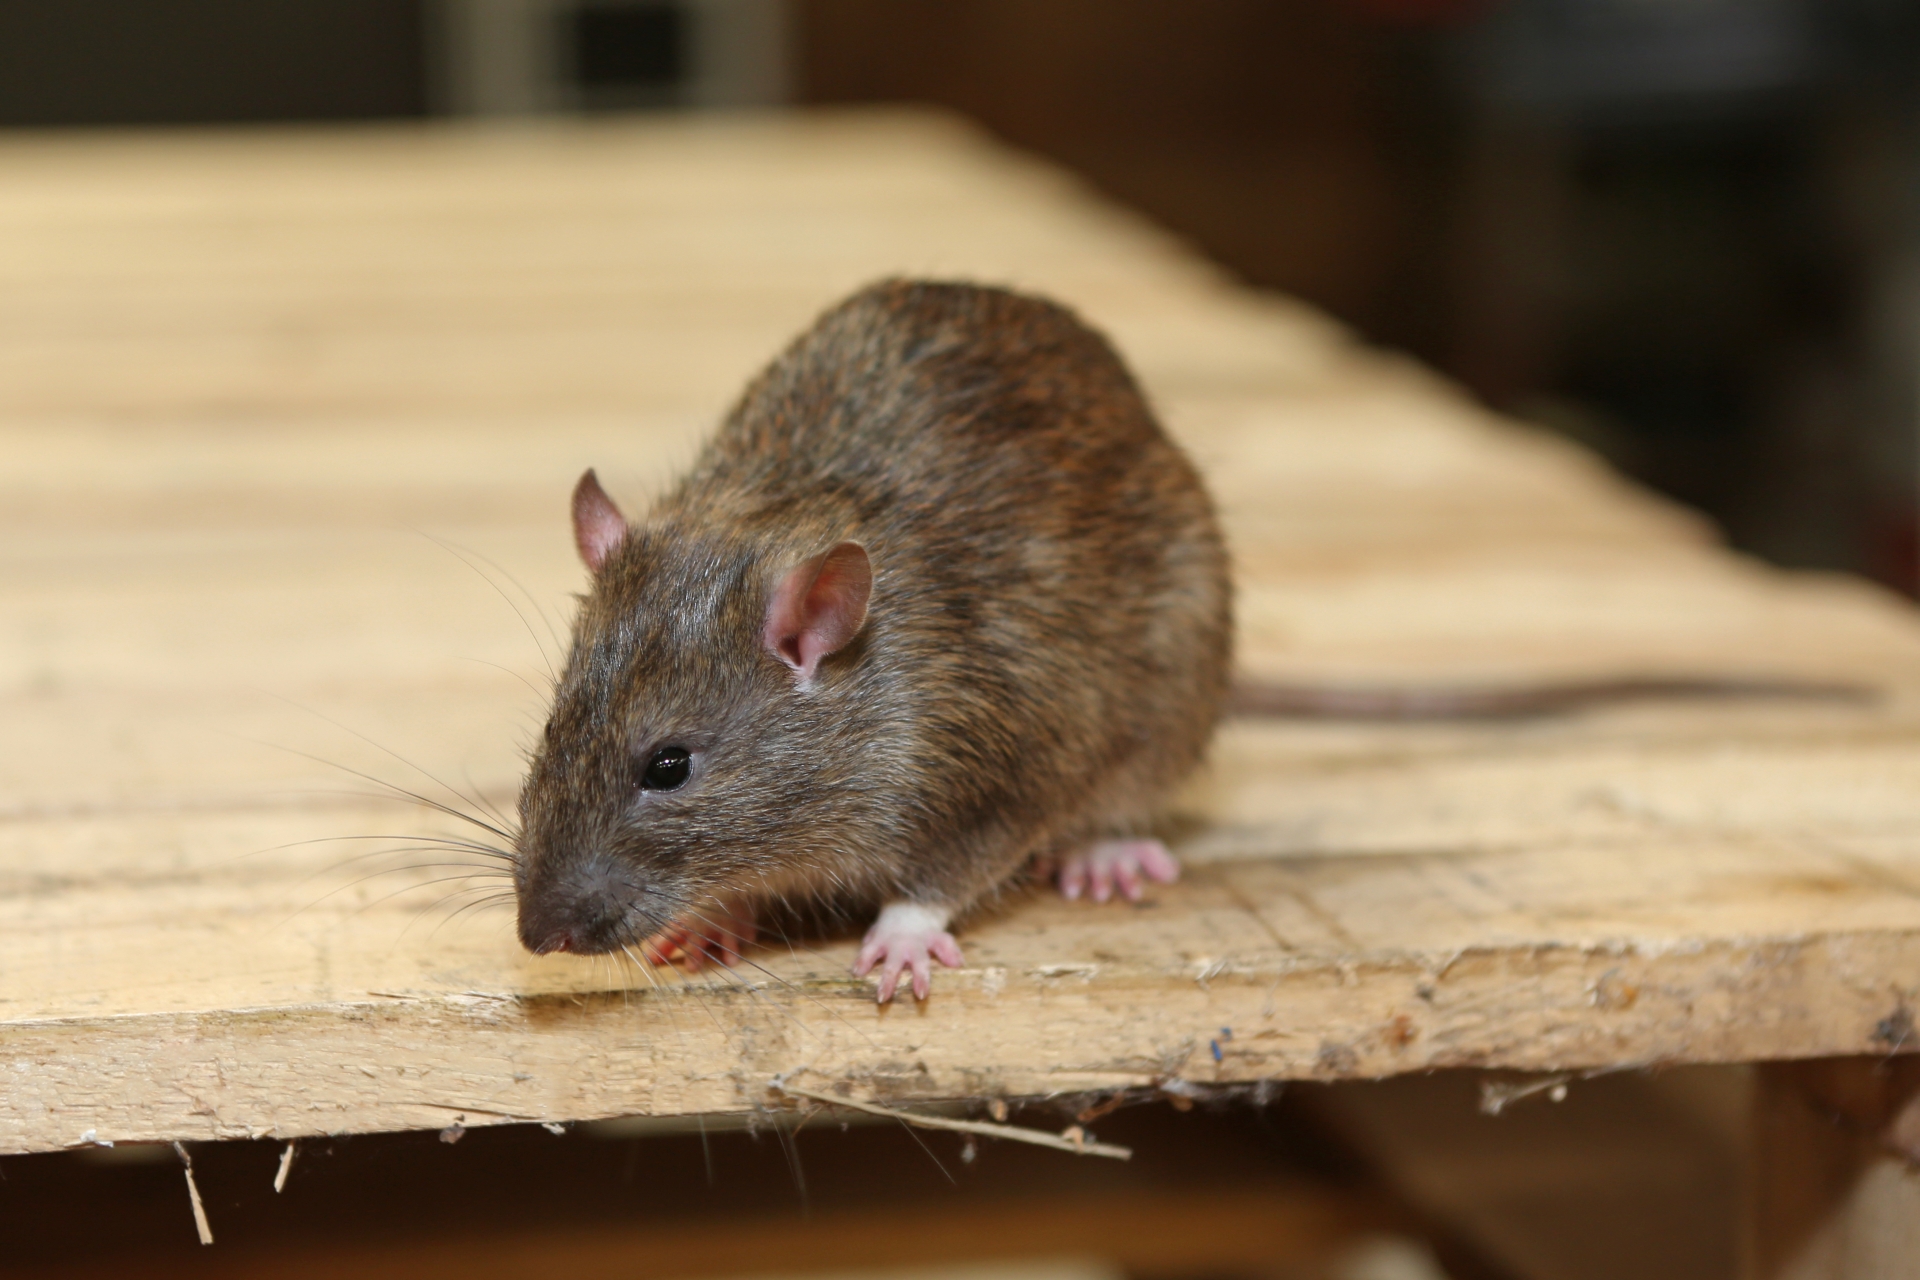 Rat Infestation, Pest Control in Holborn, Strand, Covent Garden, WC2. Call Now 020 8166 9746